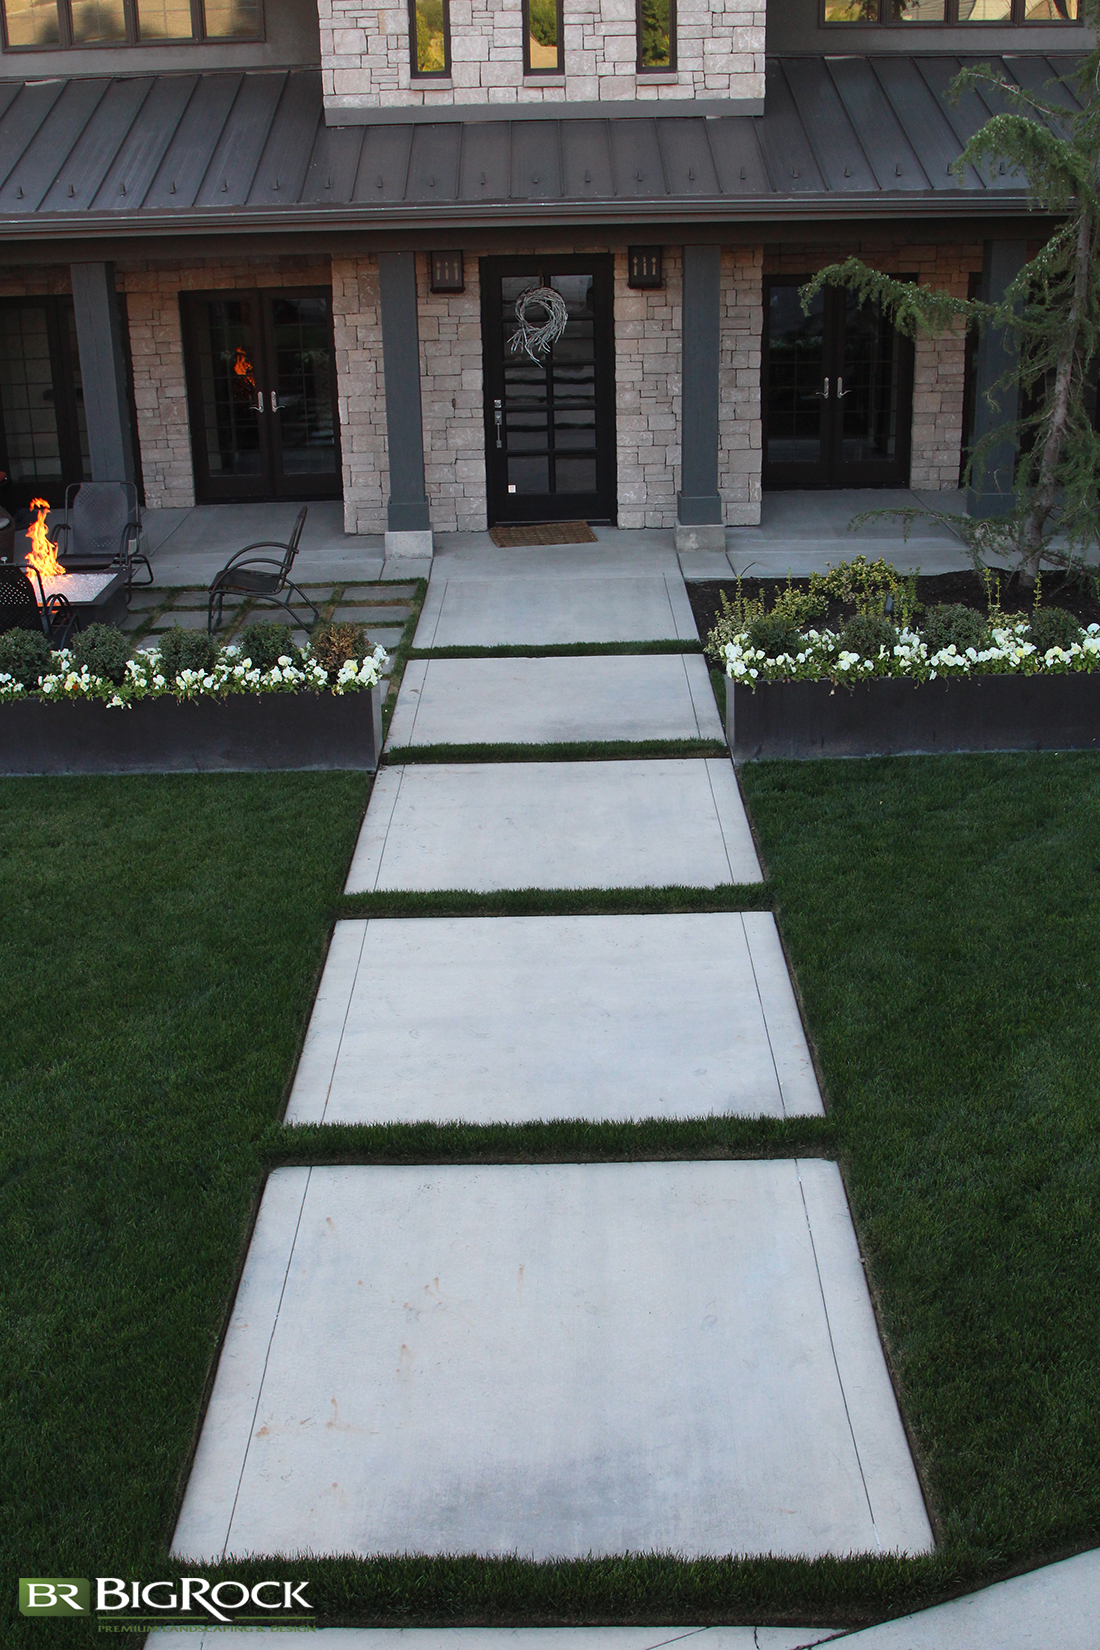 Break up large cement walkways with grass, shrubs or moss for interesting design elements in your home landscaping.